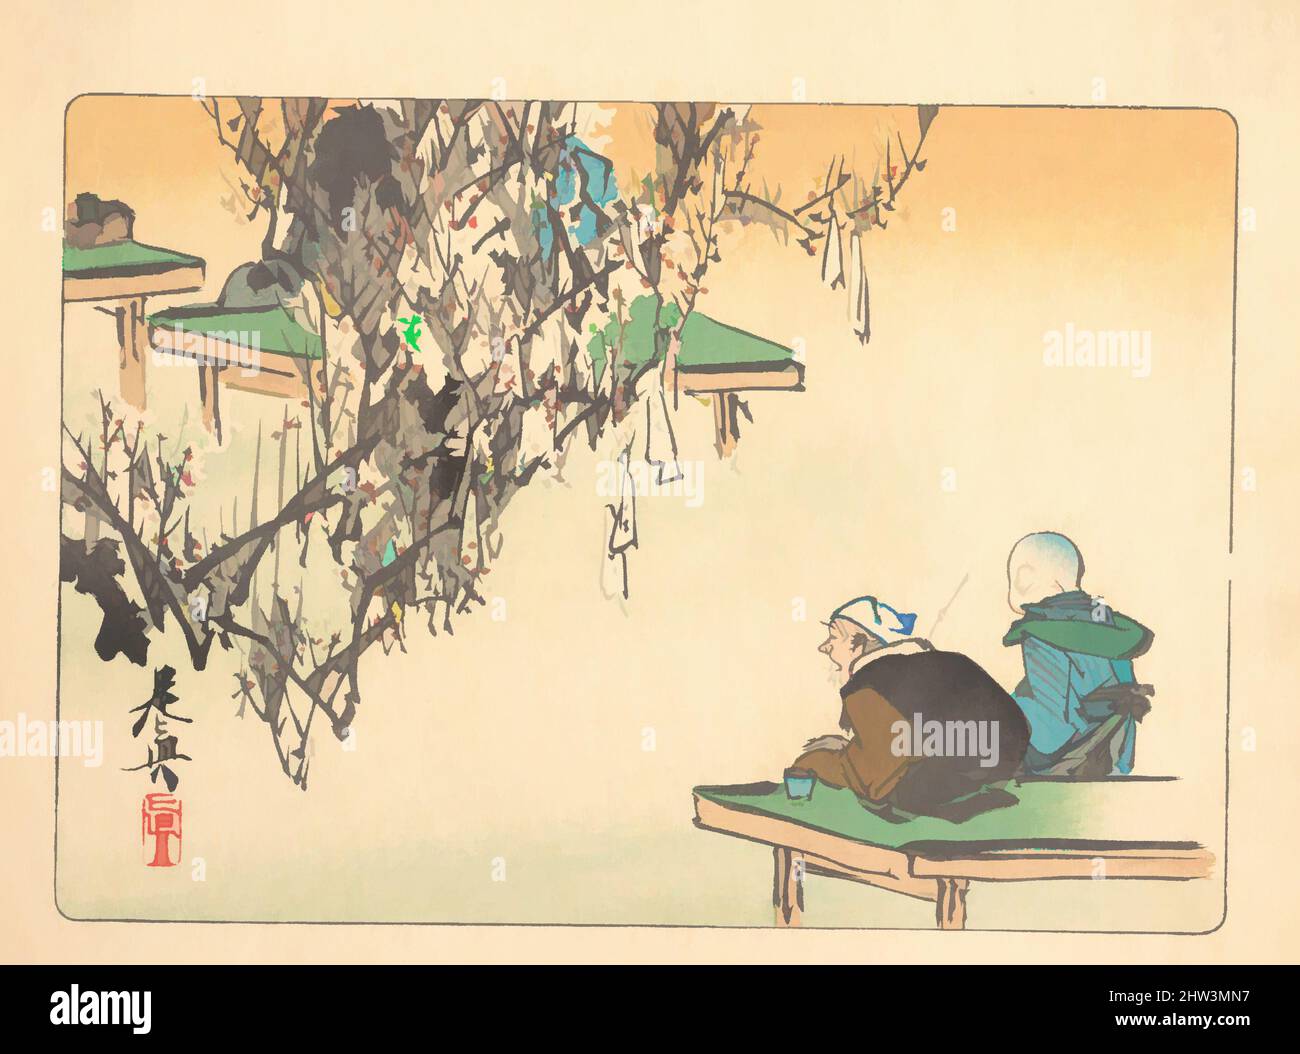 Art inspired by Two Pilgrims Gazing at a Tree Festooned with Prayers, Japan, Polychrome woodblock print; ink and color on paper, Image: 7 1/2 × 10 1/8 in. (19.1 × 25.7 cm), Prints, Shibata Zeshin (Japanese, 1807–1891, Classic works modernized by Artotop with a splash of modernity. Shapes, color and value, eye-catching visual impact on art. Emotions through freedom of artworks in a contemporary way. A timeless message pursuing a wildly creative new direction. Artists turning to the digital medium and creating the Artotop NFT Stock Photo